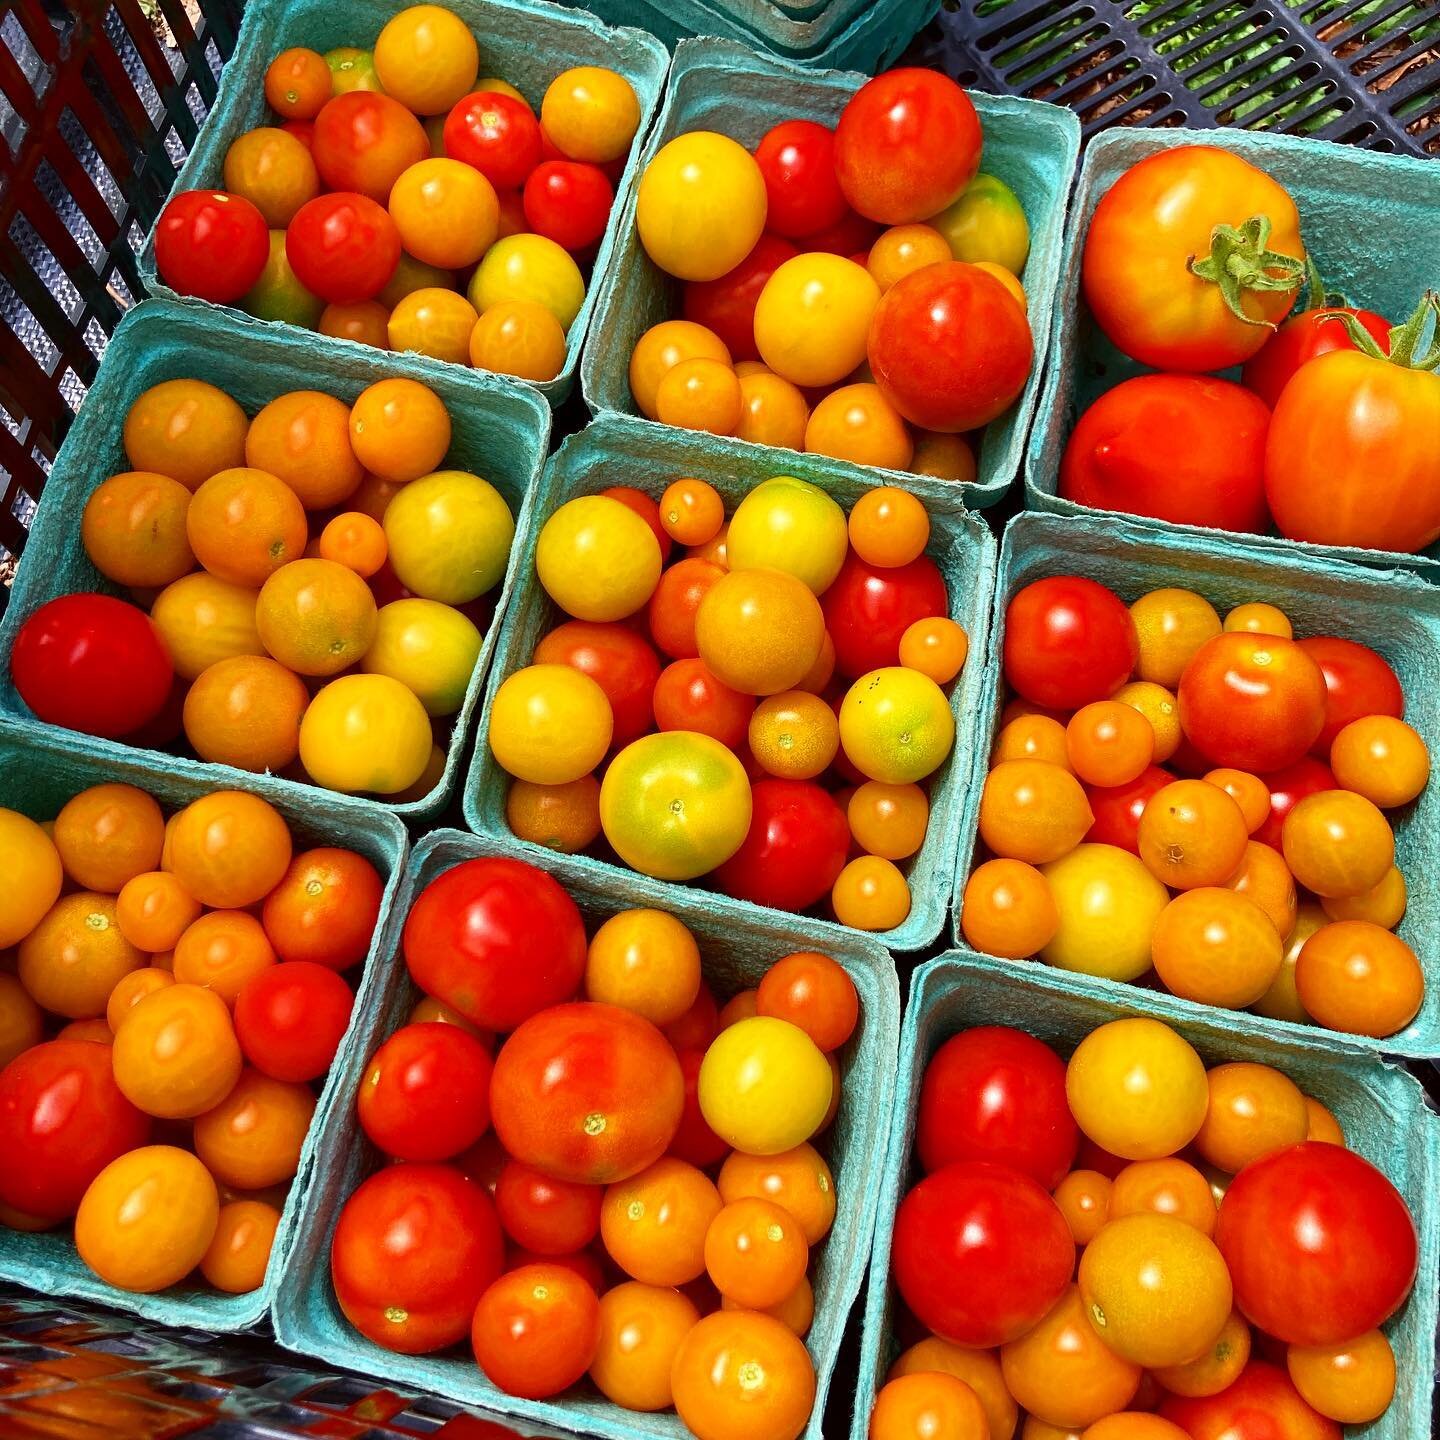 And tomato season has begun! If you&rsquo;ve had a fresh tomato off the vine or from a farmers market, you know that grocery store tomatoes can&rsquo;t hold a candle to the real thing. We choose our varieties for flavor and texture, not for the abili